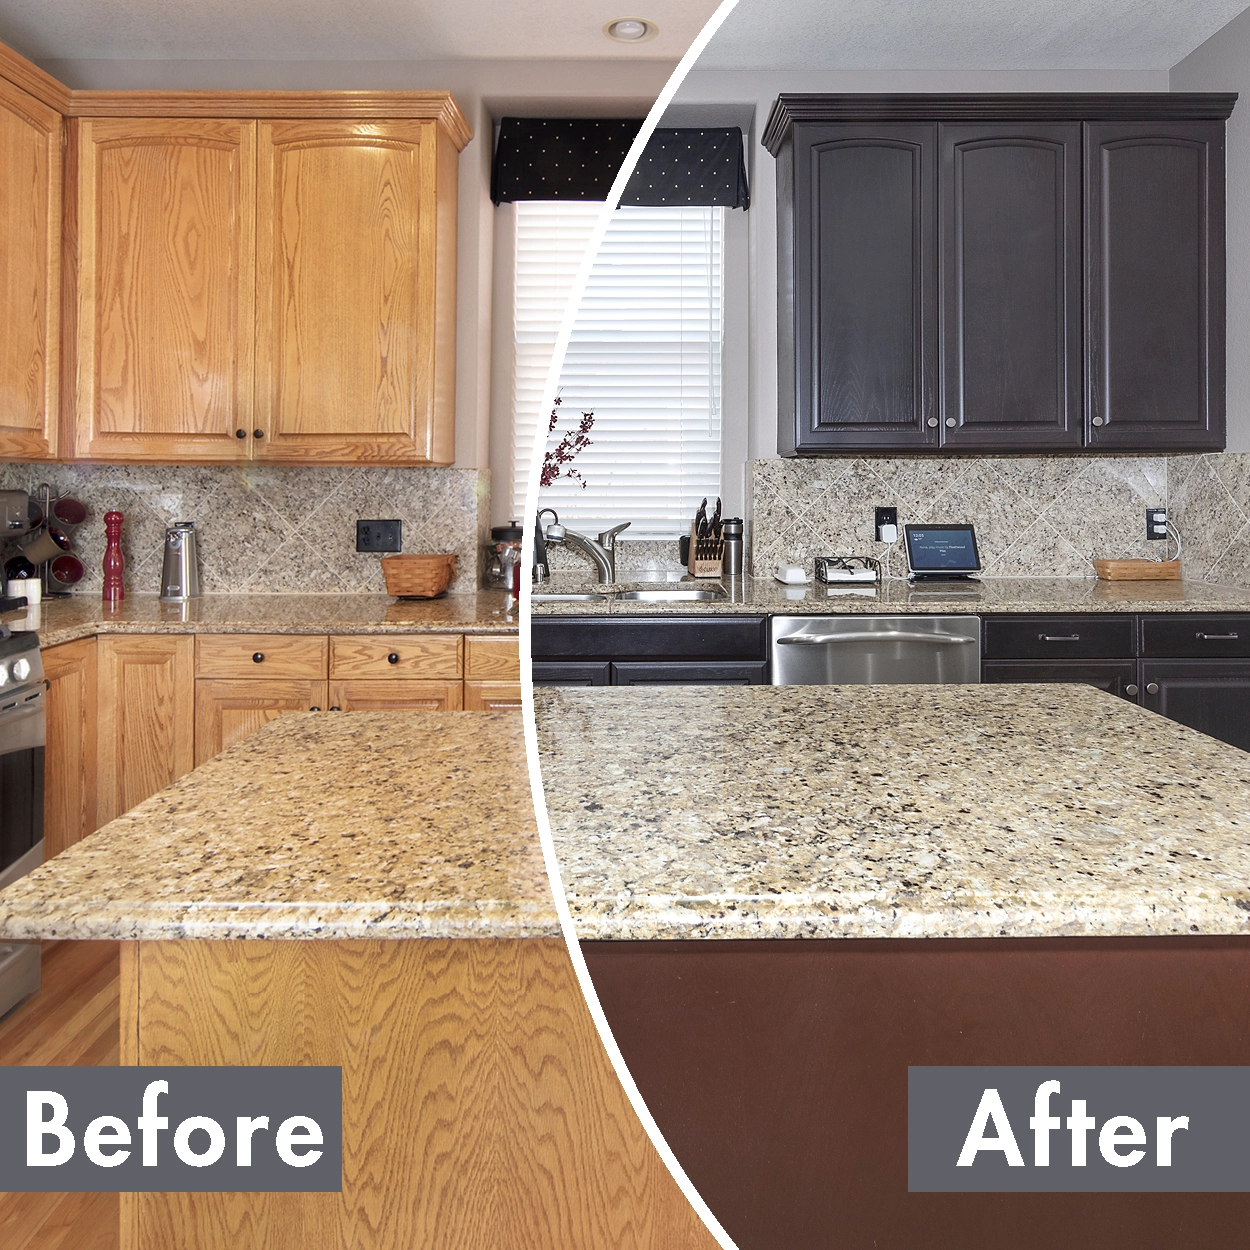 Cabinet Color Change N Hance, Can You Change The Stain Color On Kitchen Cabinets